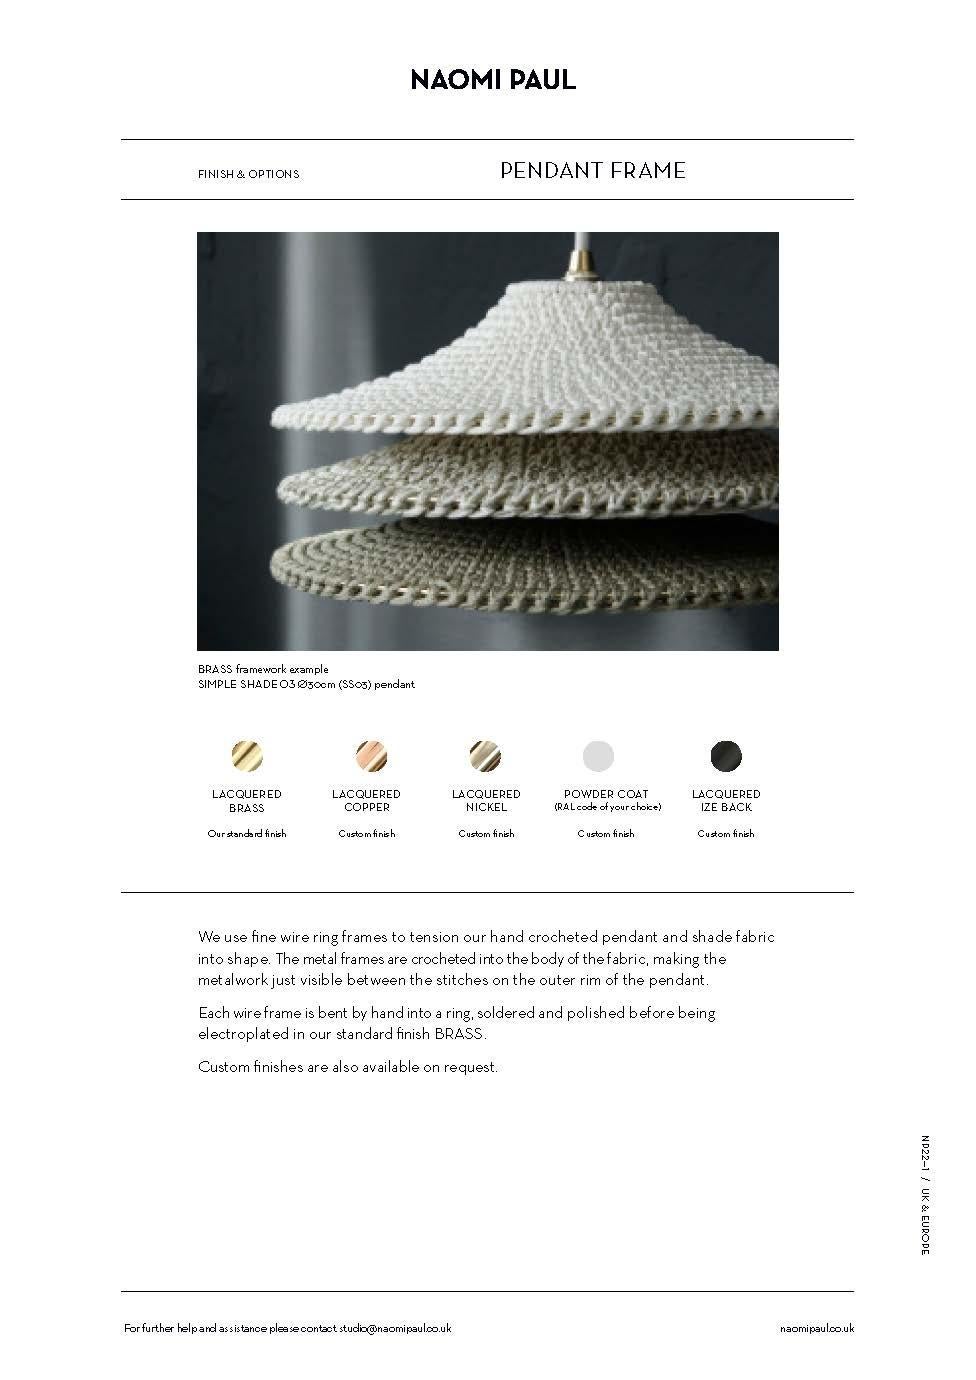 Contemporary BAMBOO SS01 Pendant Light Ø50cm/19.7in, Hand Crocheted in Bamboo Paper